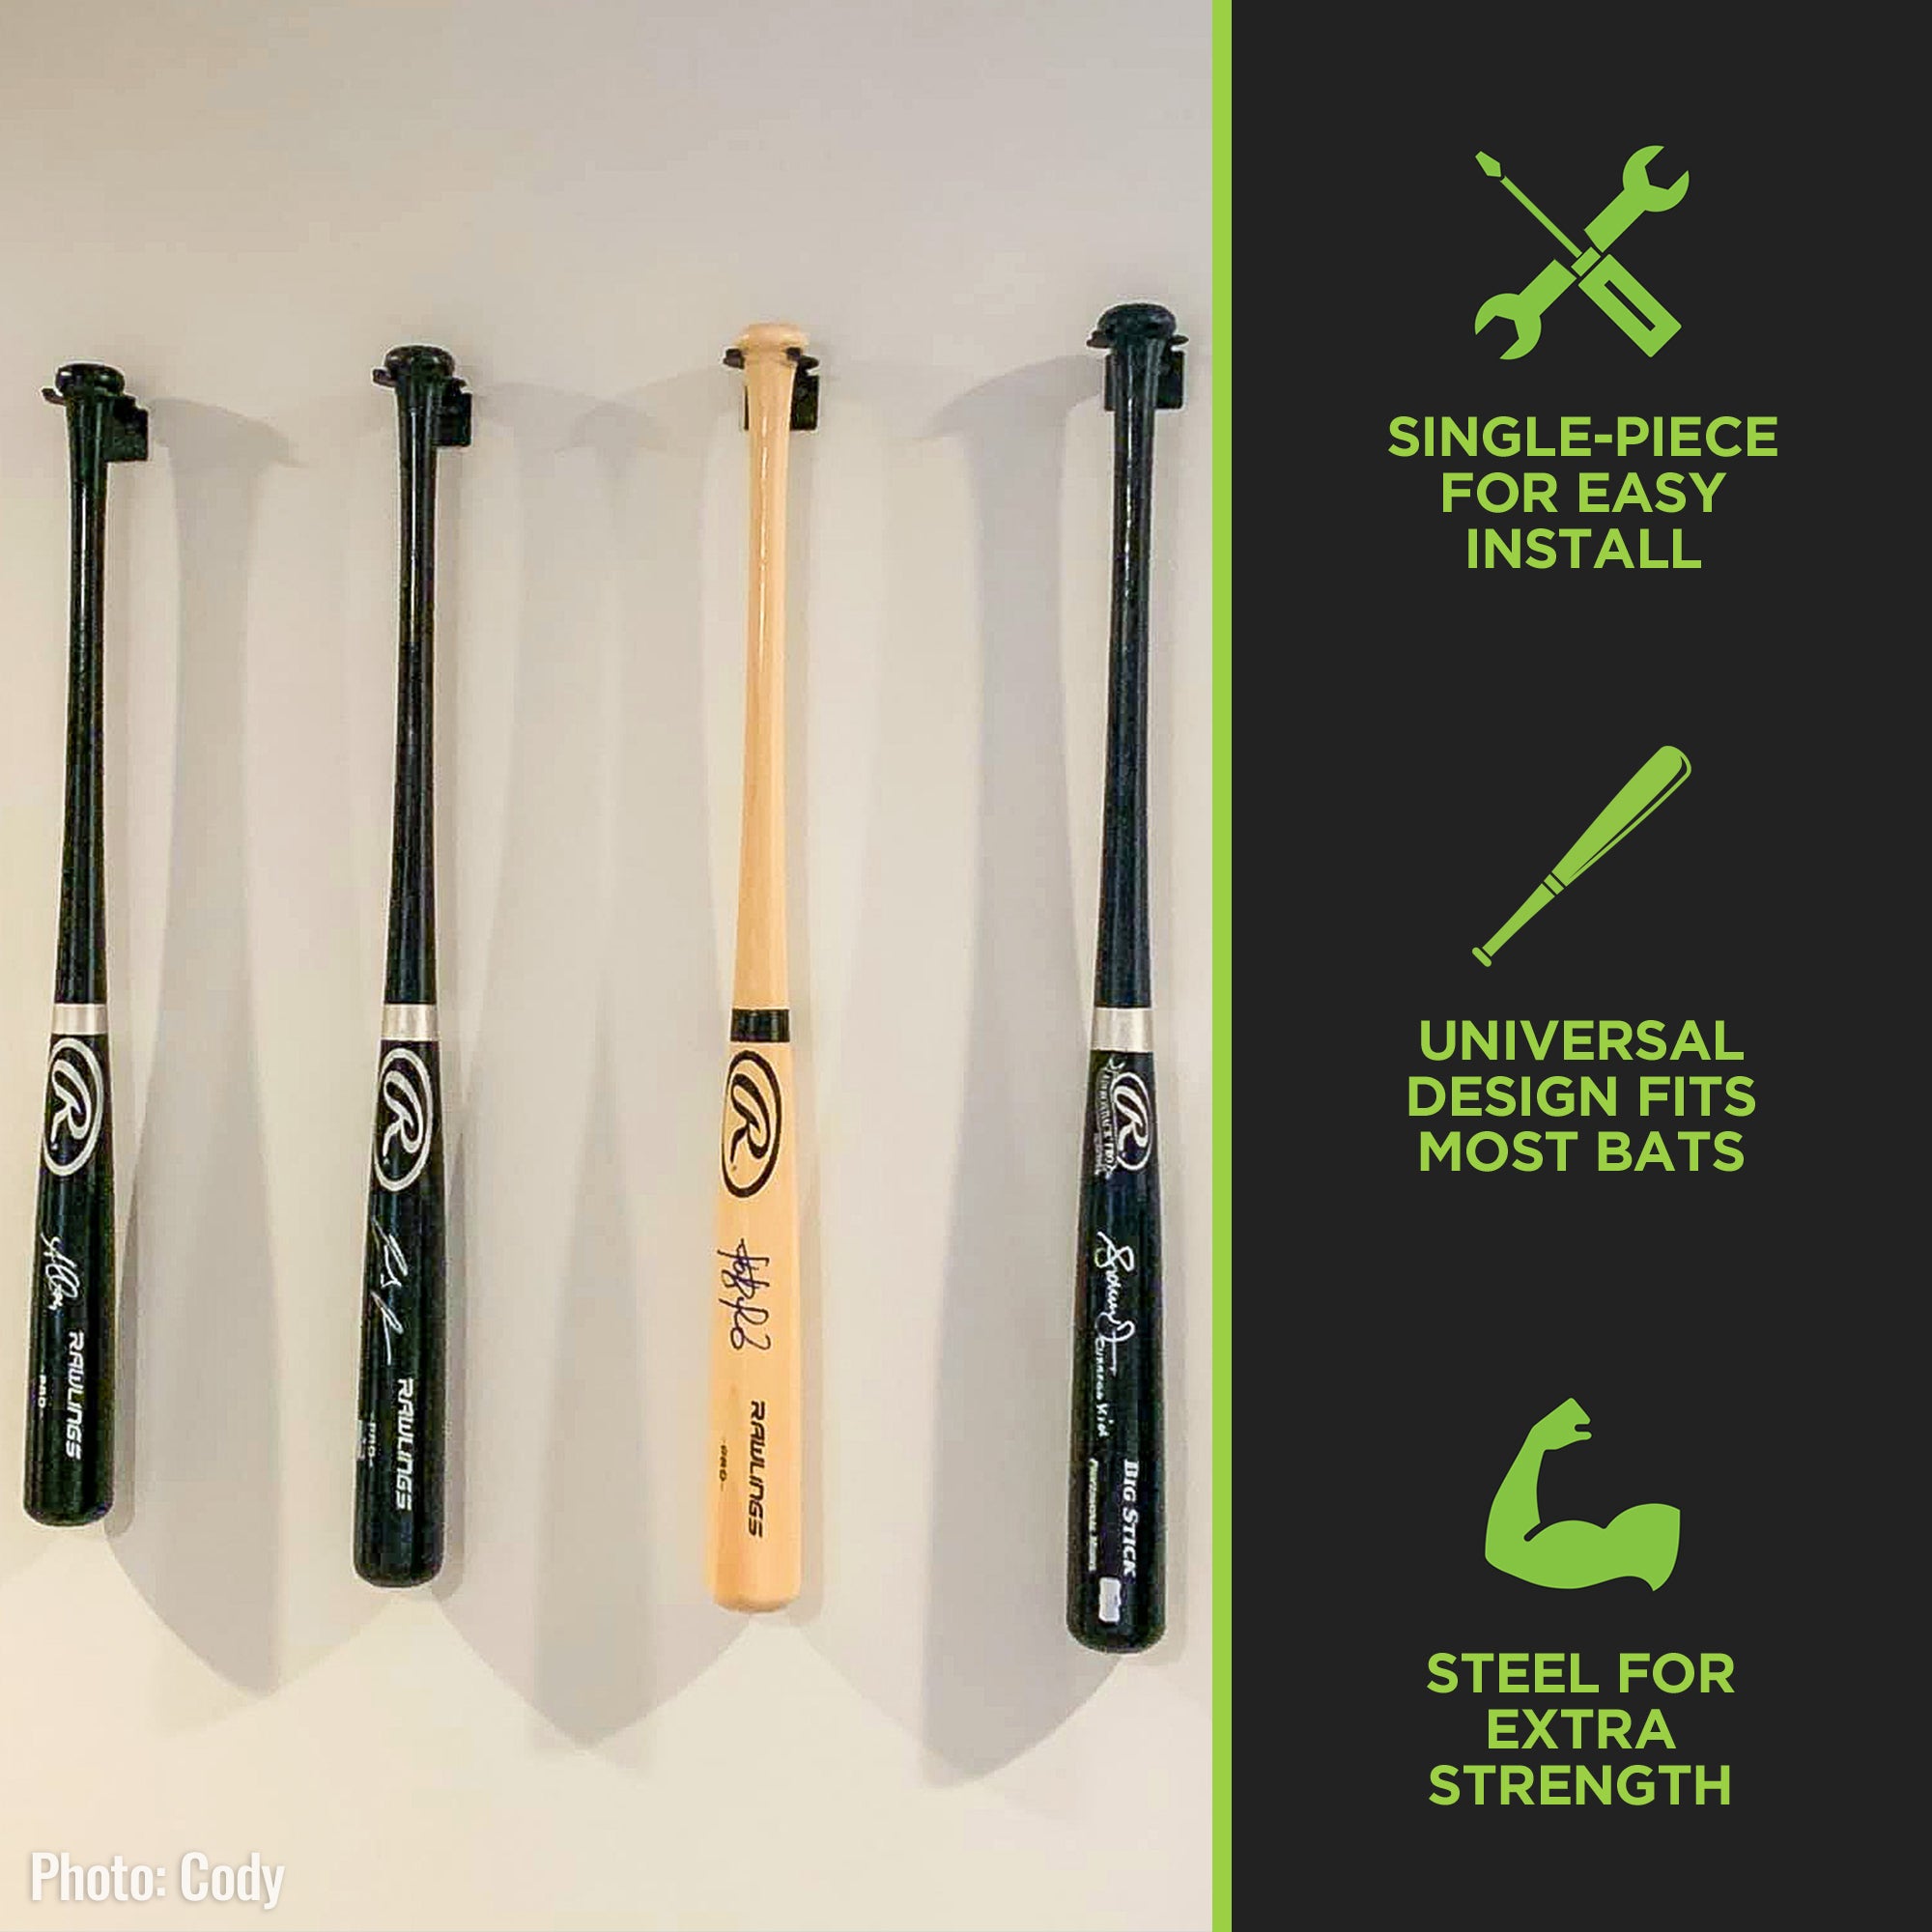 Signed baseball bats wall mounted in a game room using HIDEit Mounts universal bat holder.